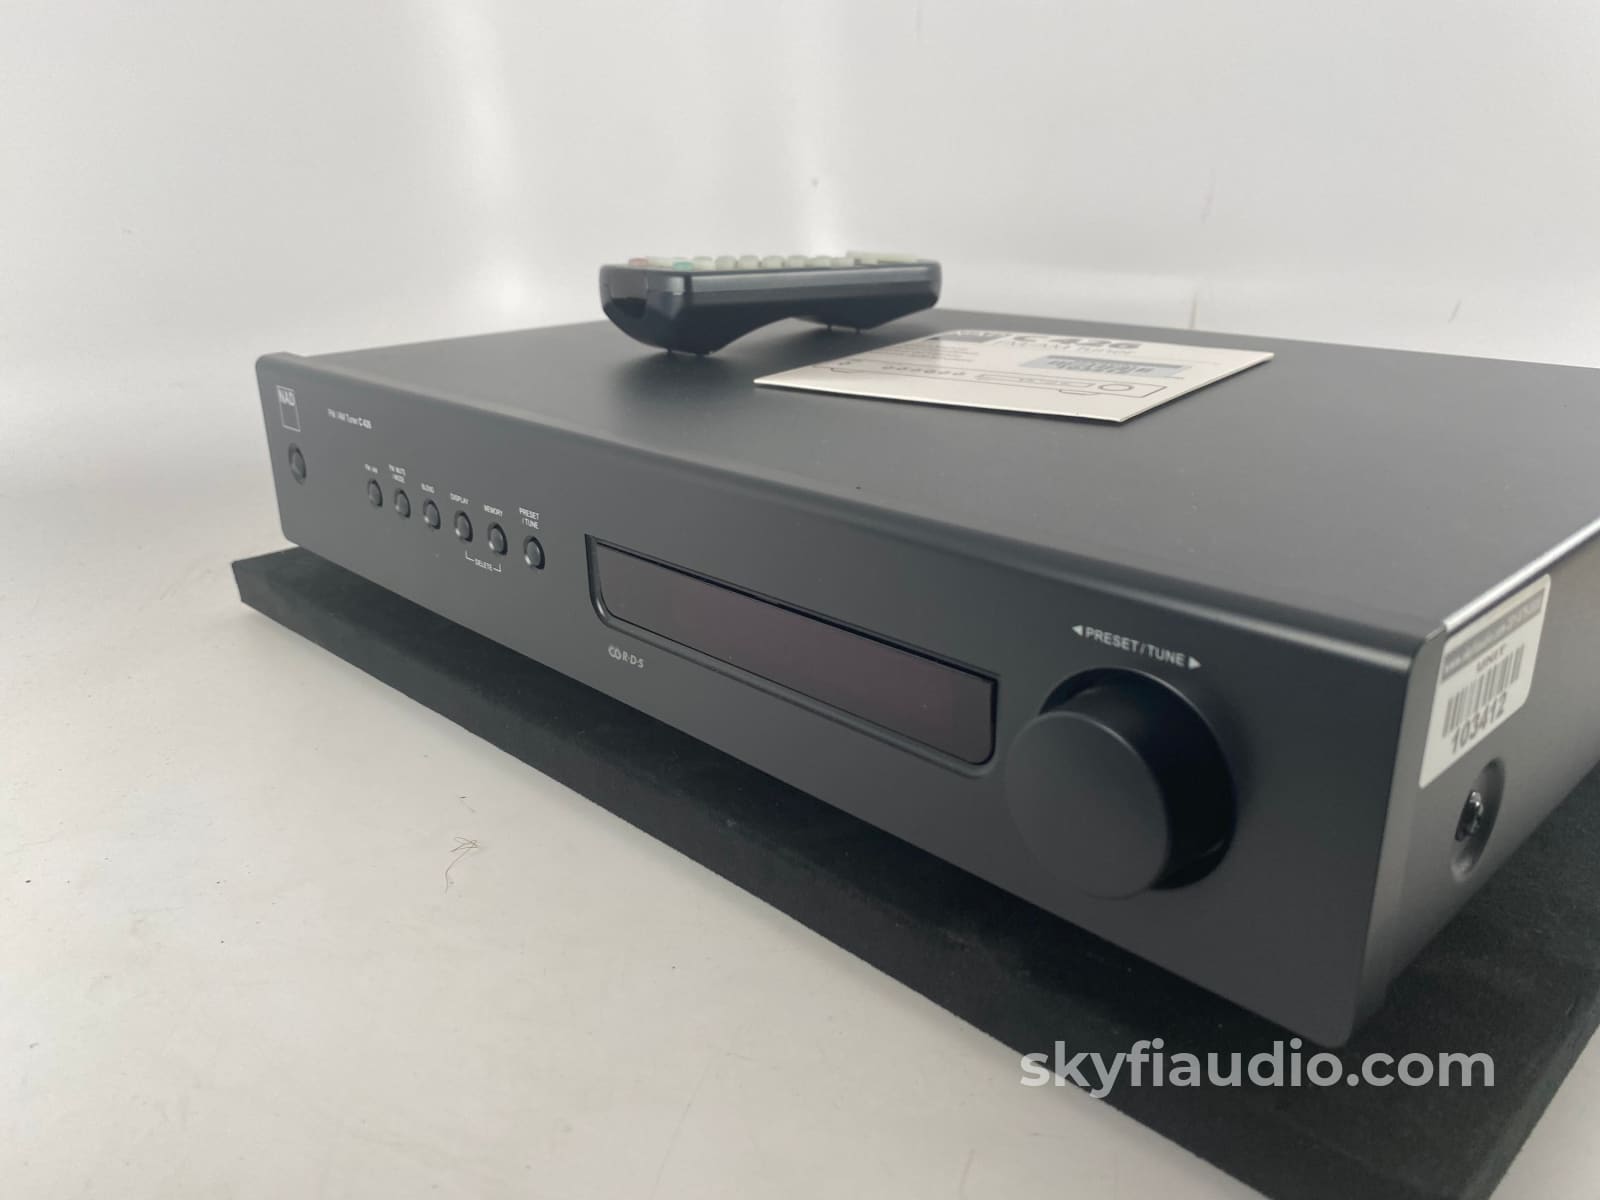 Nad C 426 Stereo Am/Fm Tuner